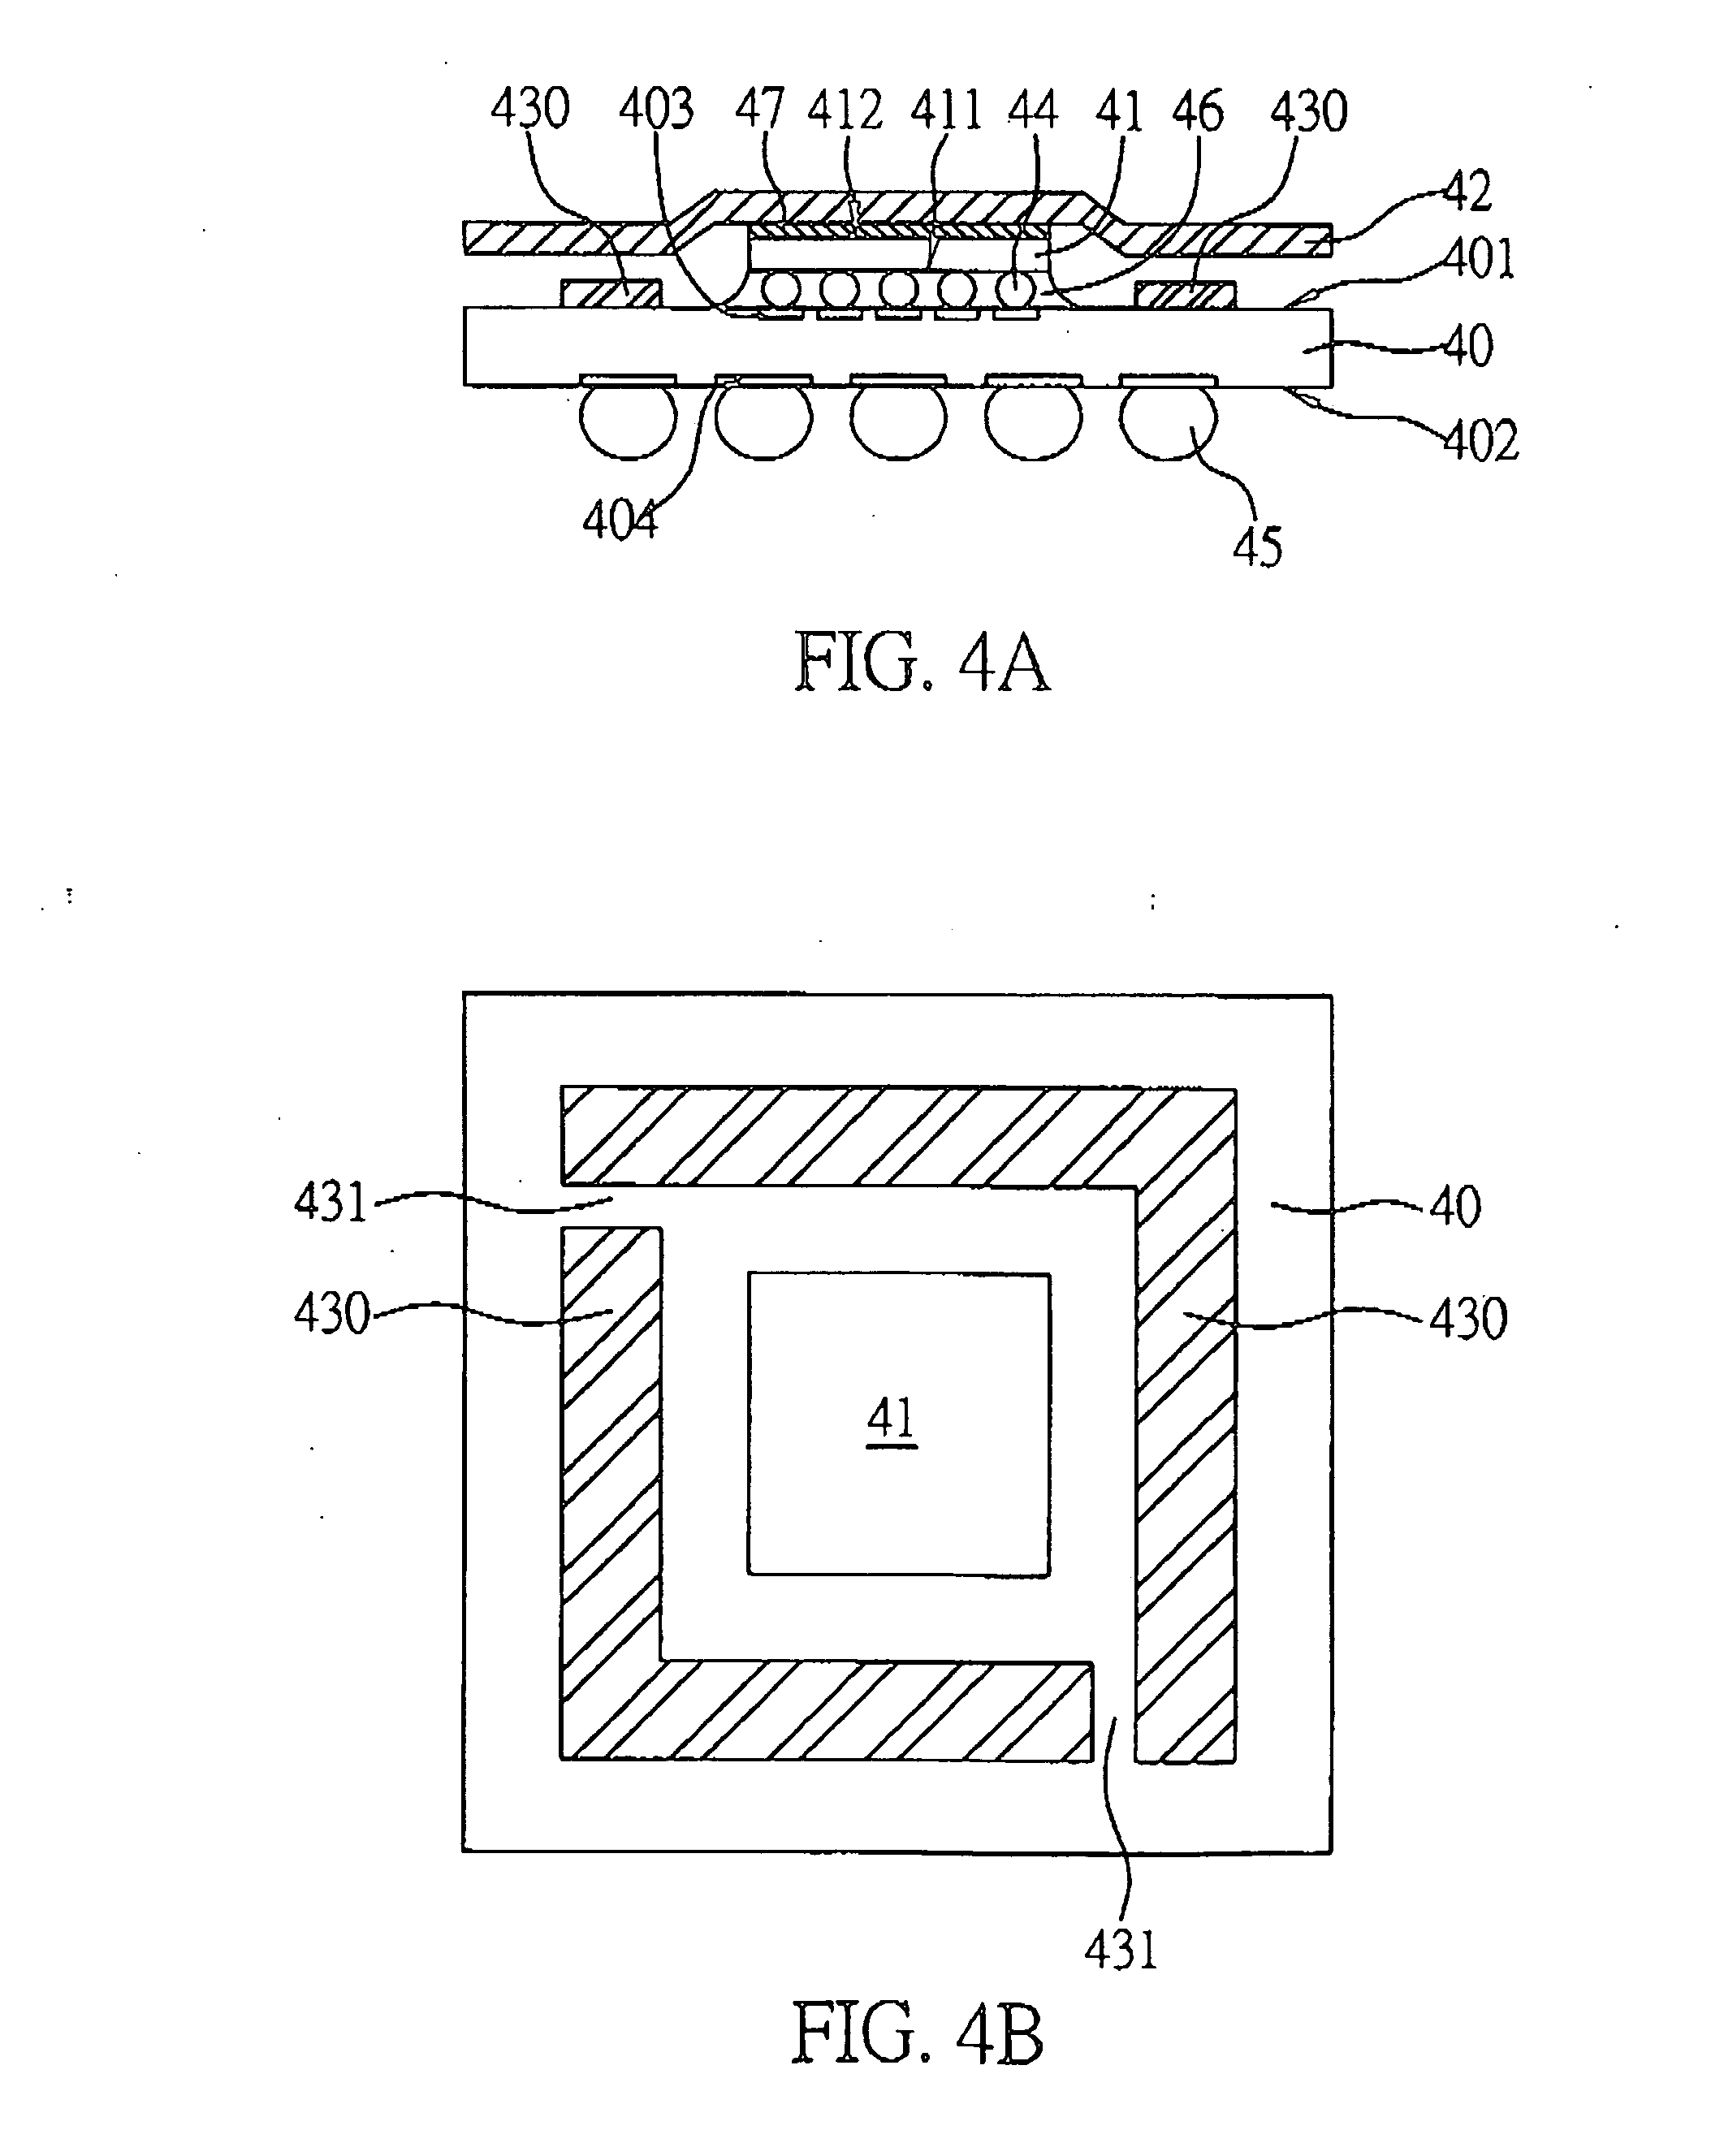 Flip-chip semiconductor device